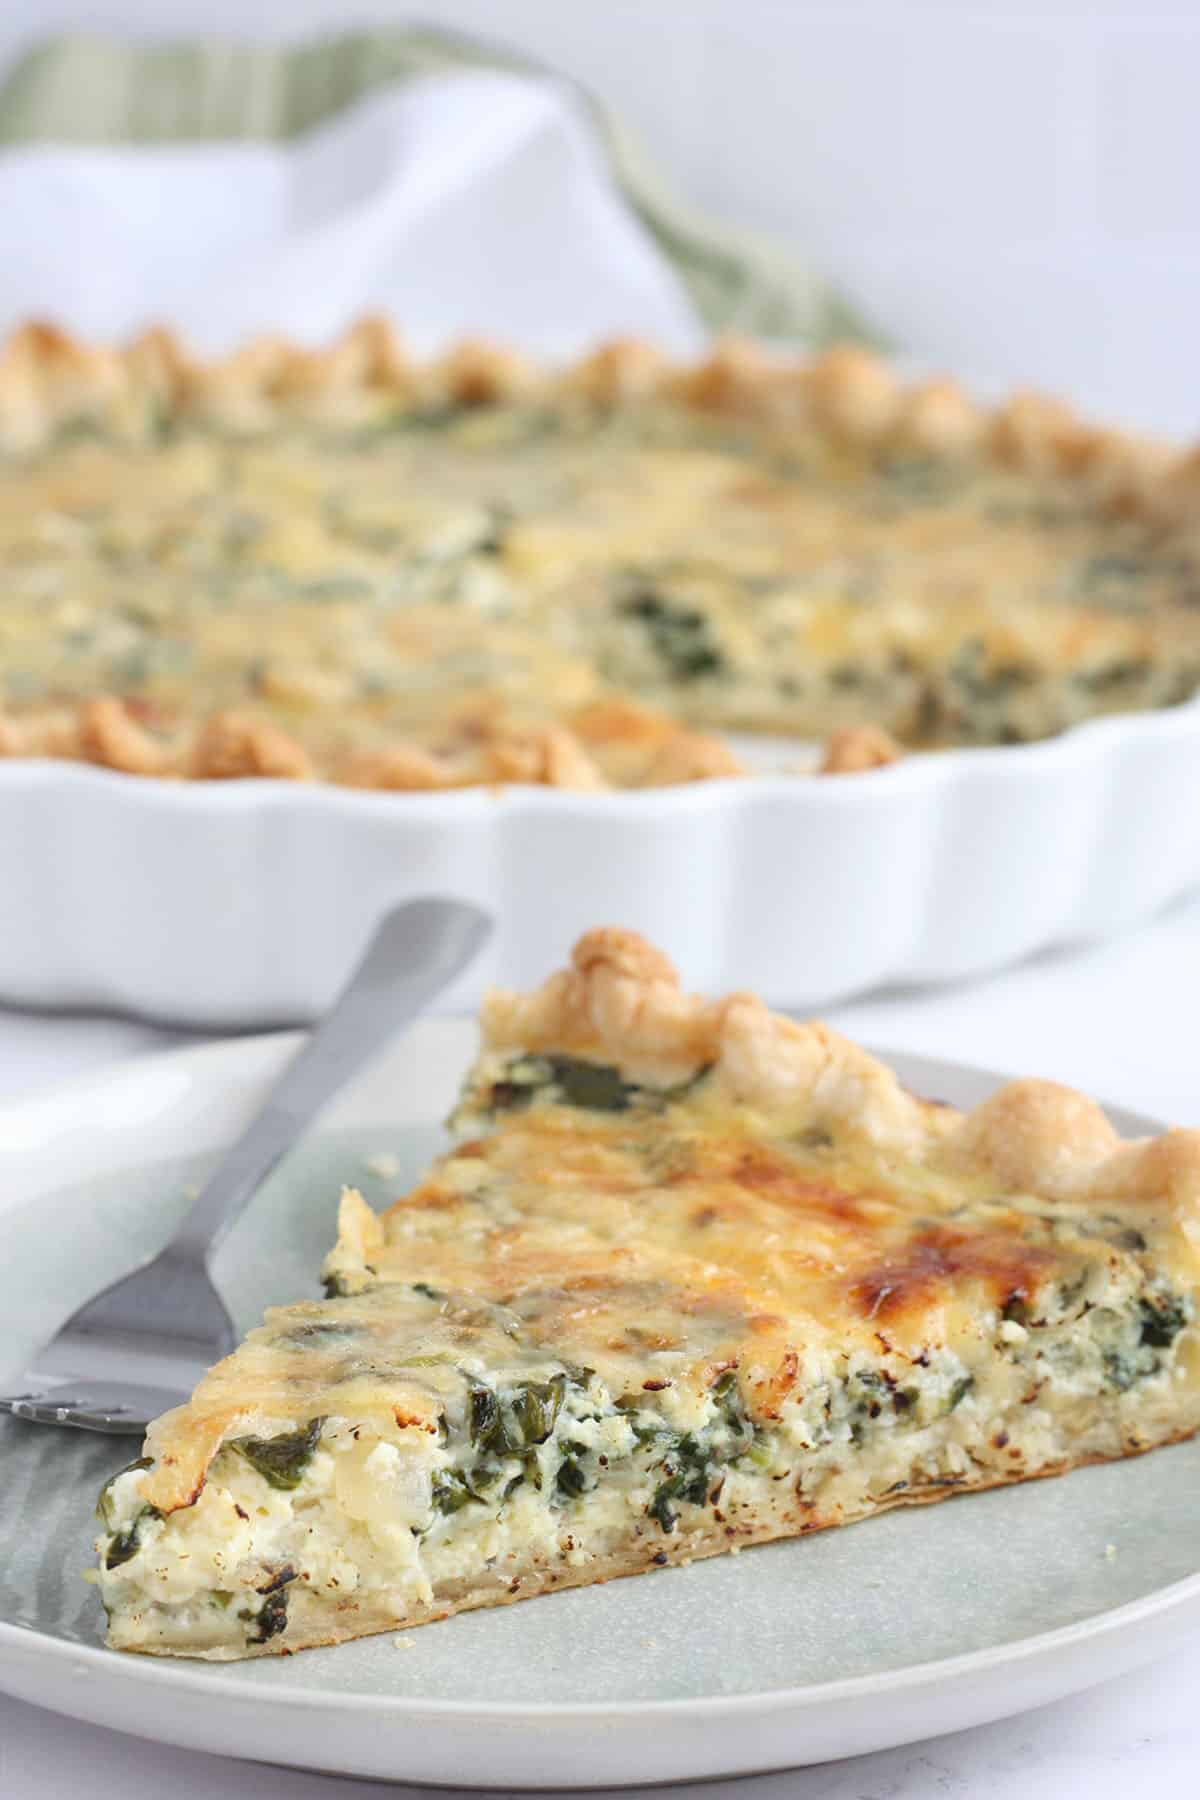 Slice of spinach quiche on serving plate with fork